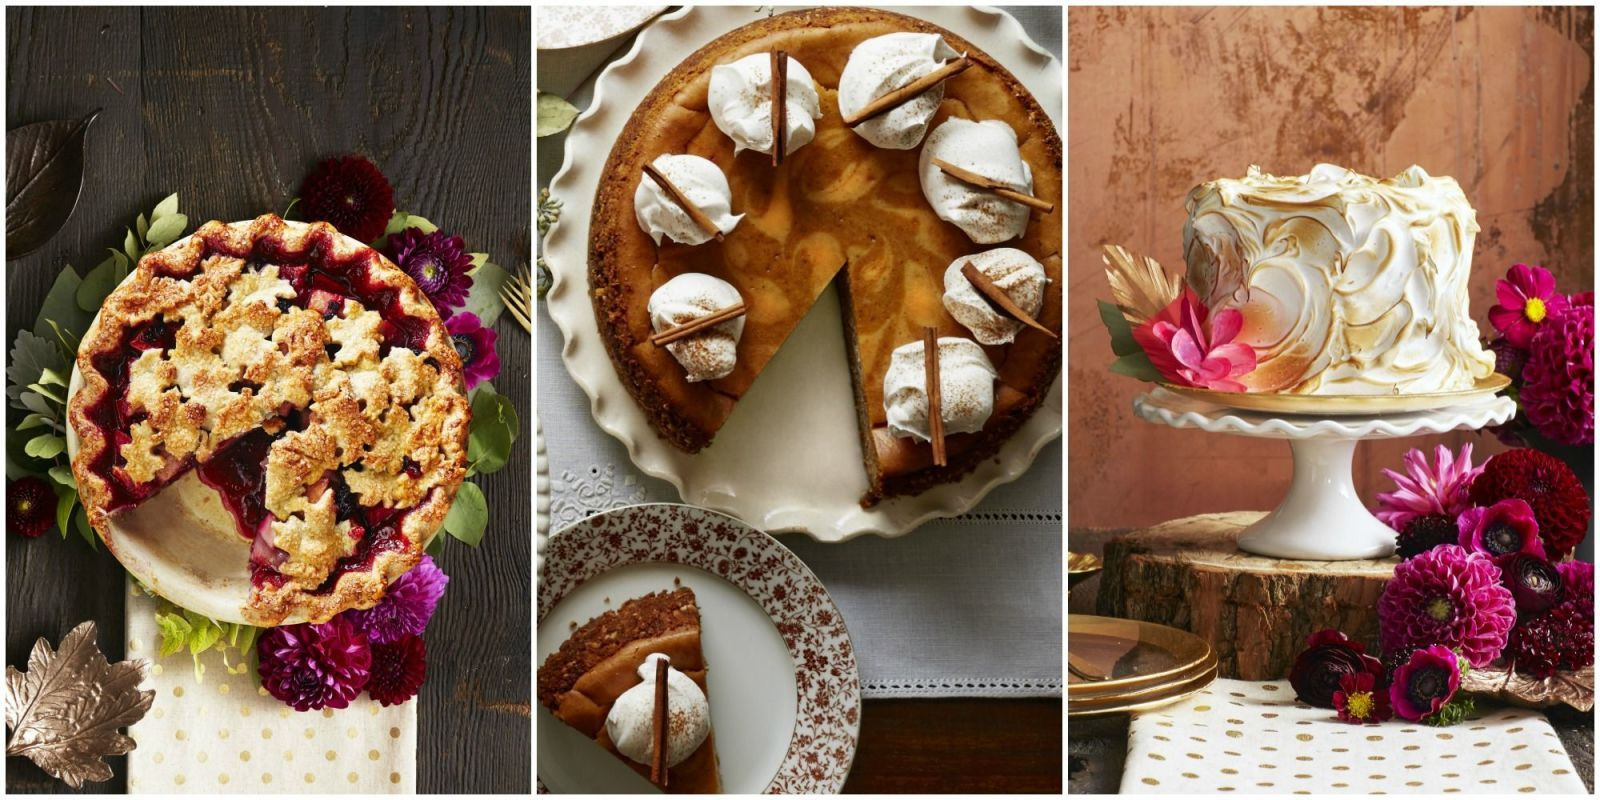 Thanksgiving Pies And Cakes
 65 Absolutely Incredible Thanksgiving Desserts